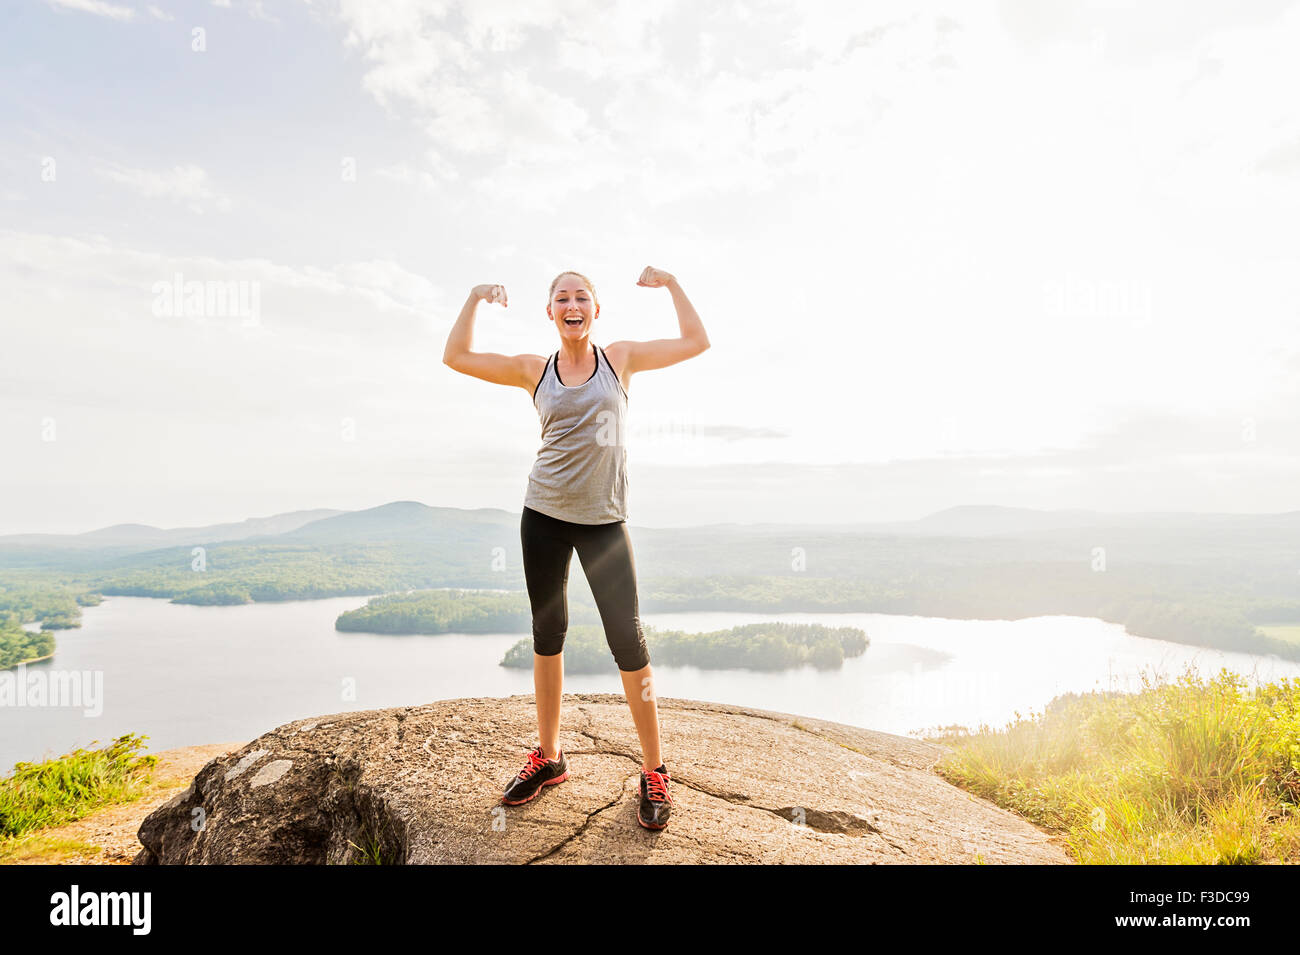 Young woman standing on top of mountain and flexing muscles Stock Photo